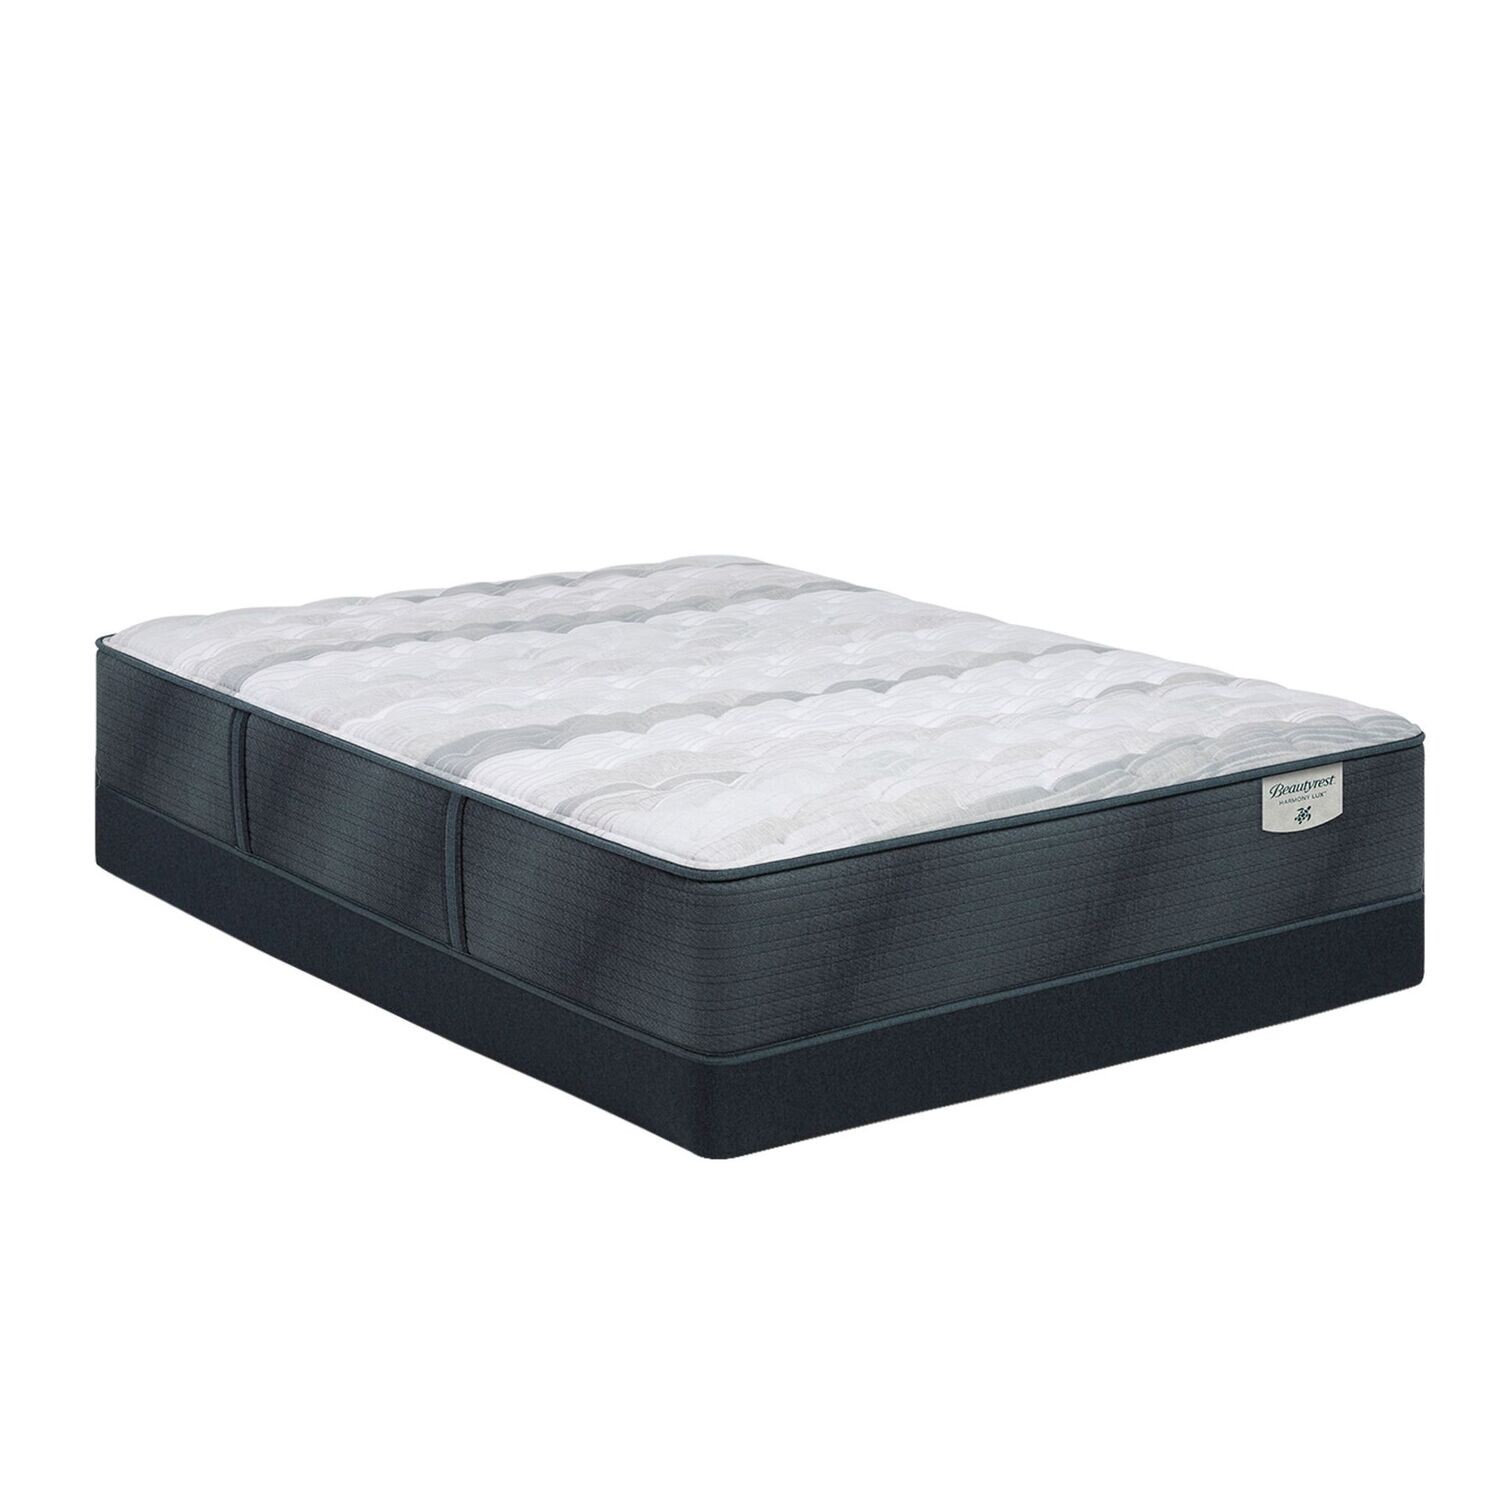 BeautyRest Harmony Lux Firm, Size: Queen, Add a Base: No Base